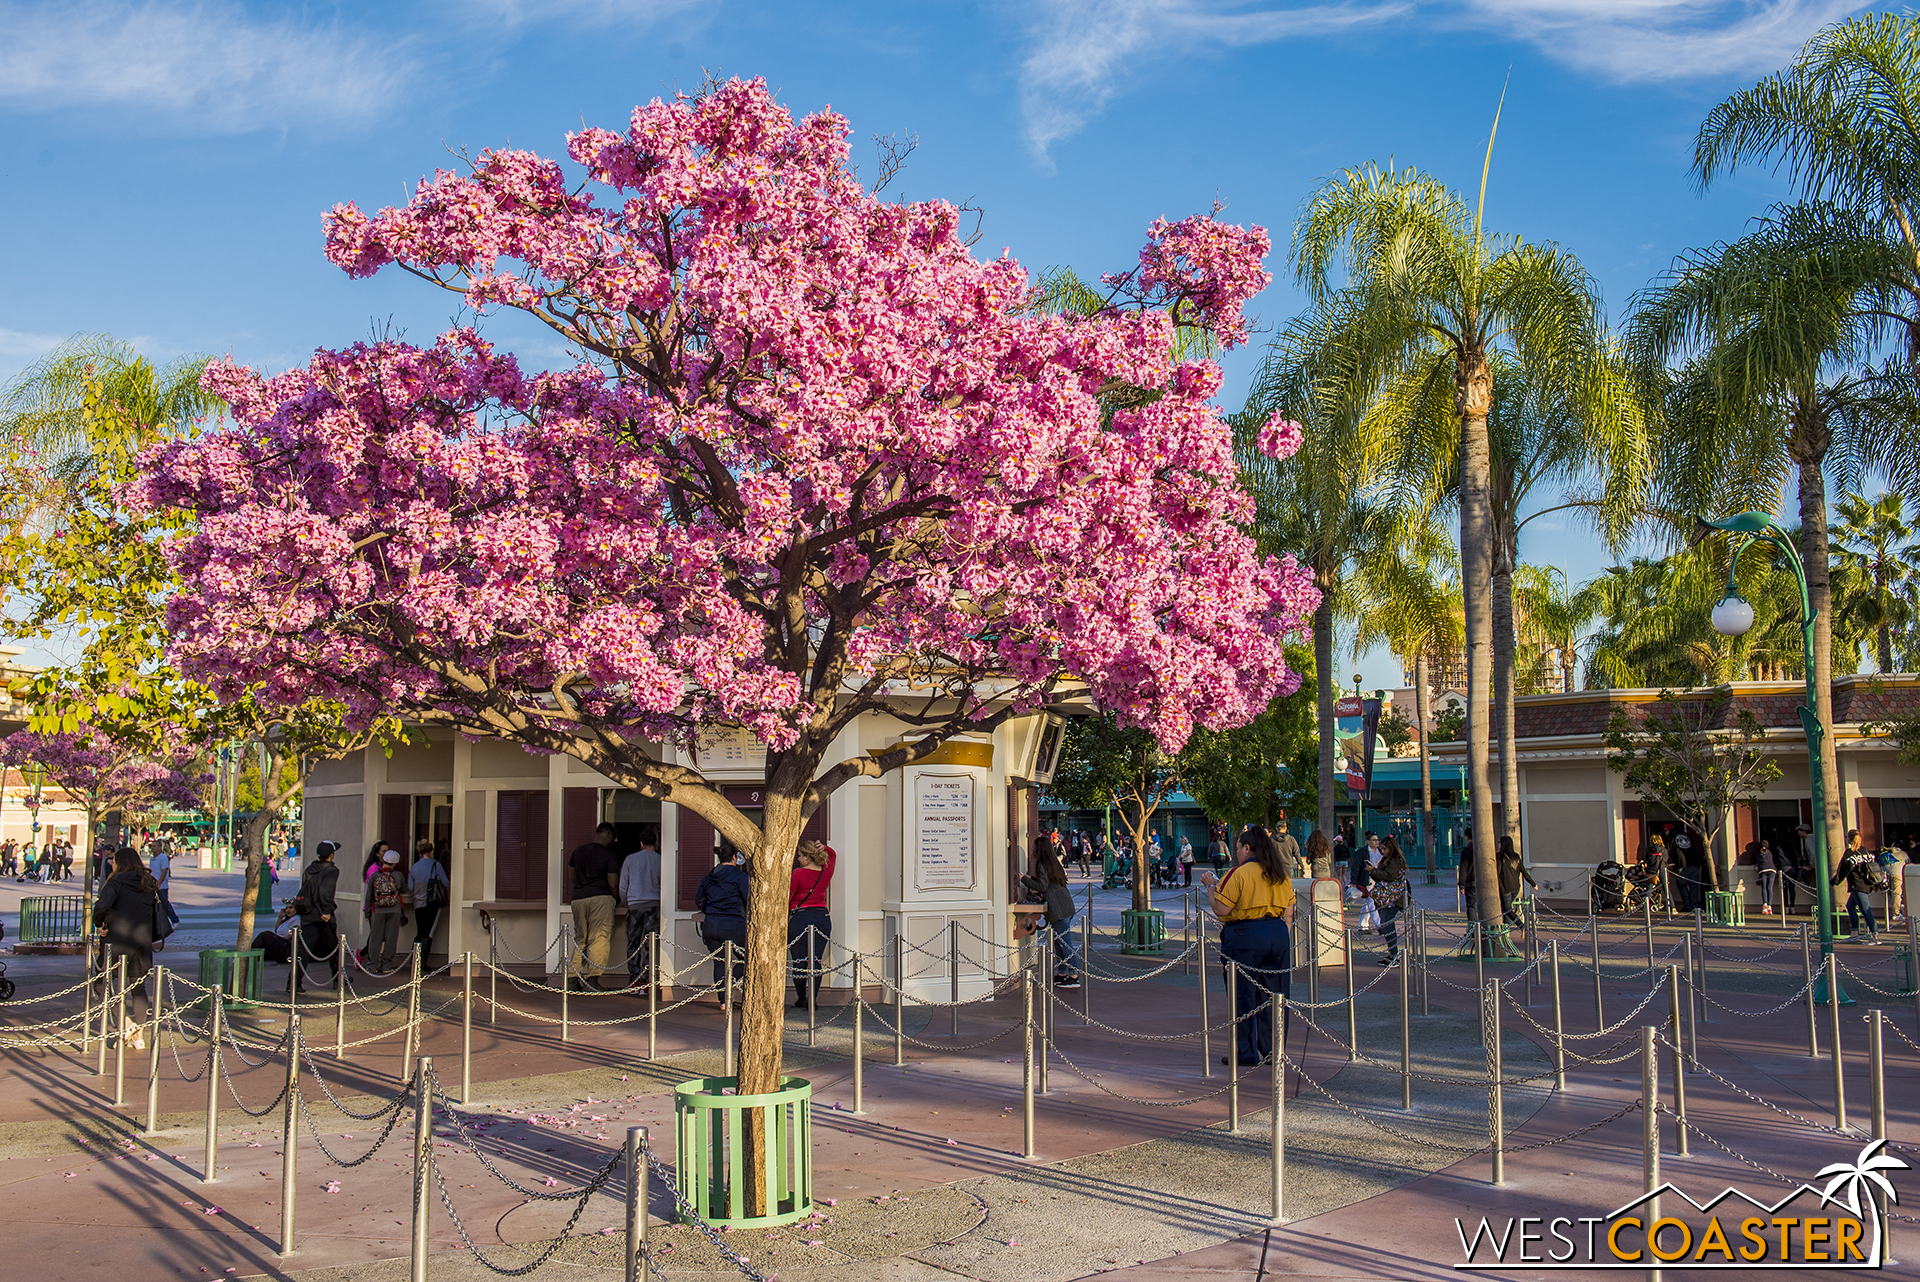  Springtime at the Disneyland Resort means pink takes over everywhere. 